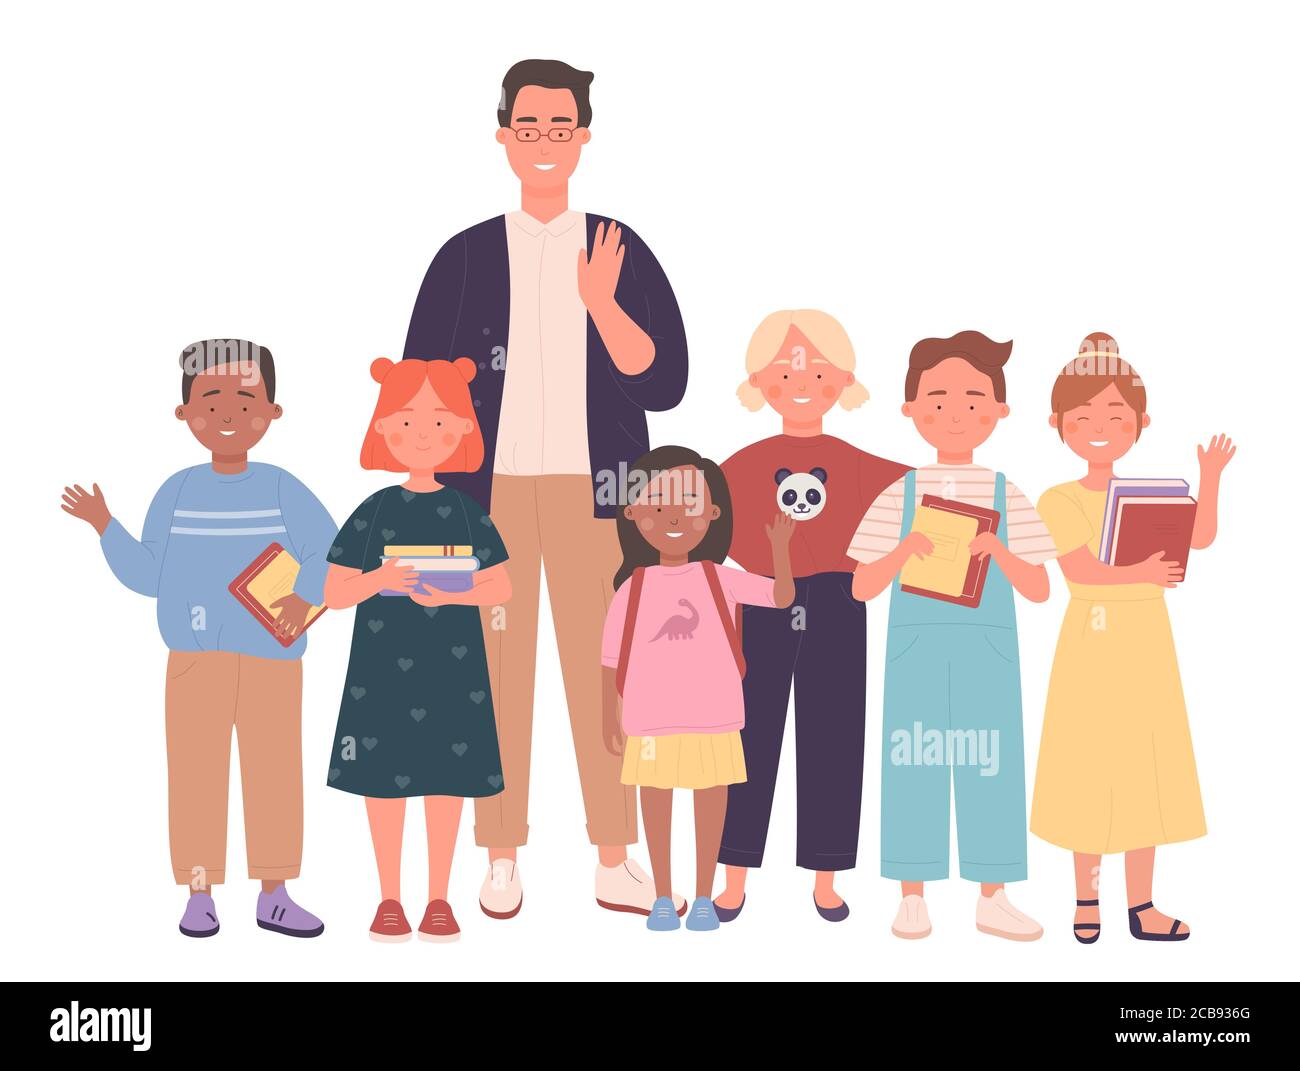 Male Teacher and kids vector illustration. Pedagogues and pupils, smiling adults and schoolchildren flat characters. Study group, class photo, man educator with children, learners and teaching staff Stock Vector